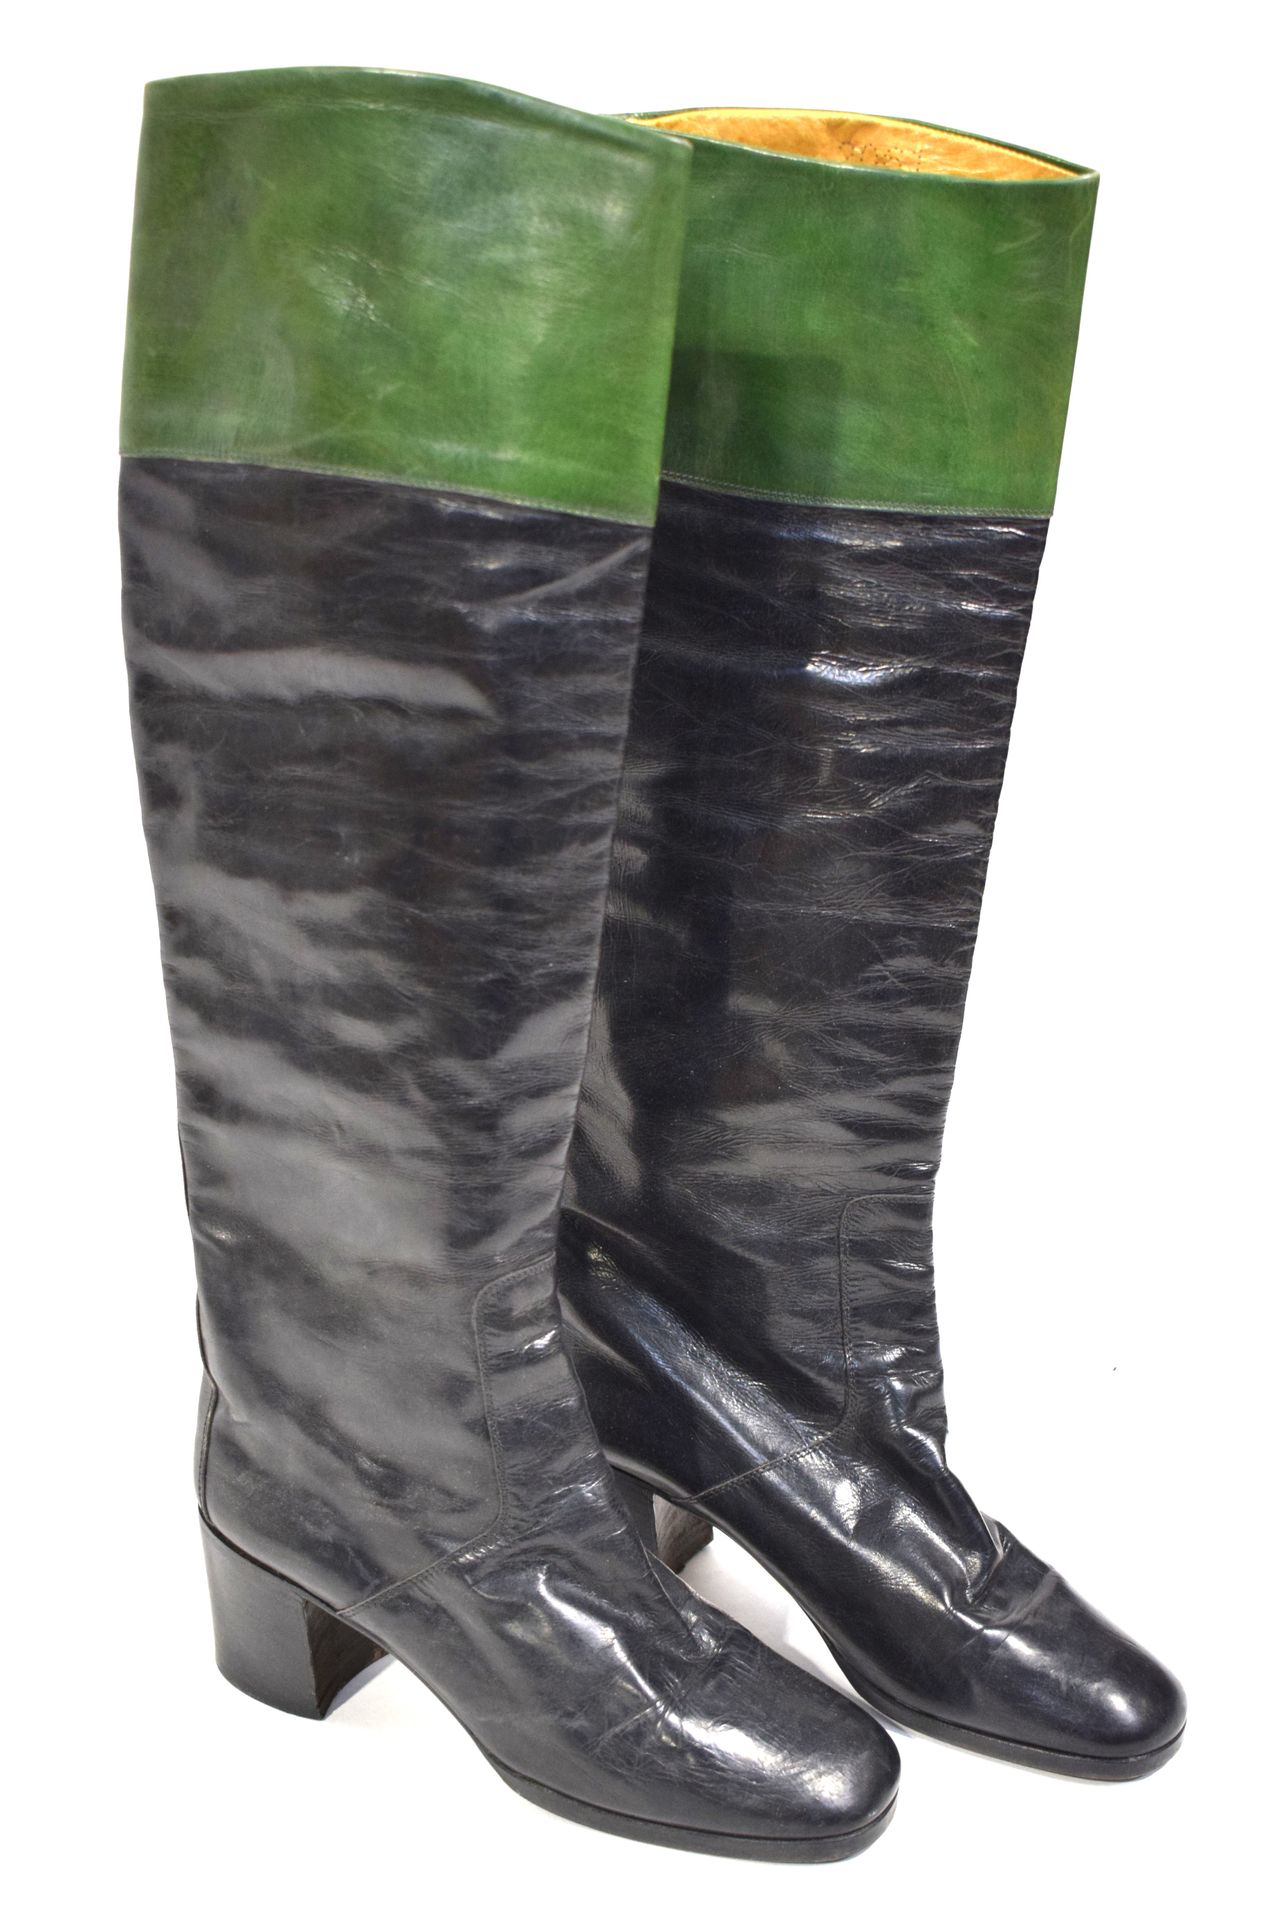 Null FRANÇOIS VILLON
Pair of black leather boots with green leather top band, si&hellip;